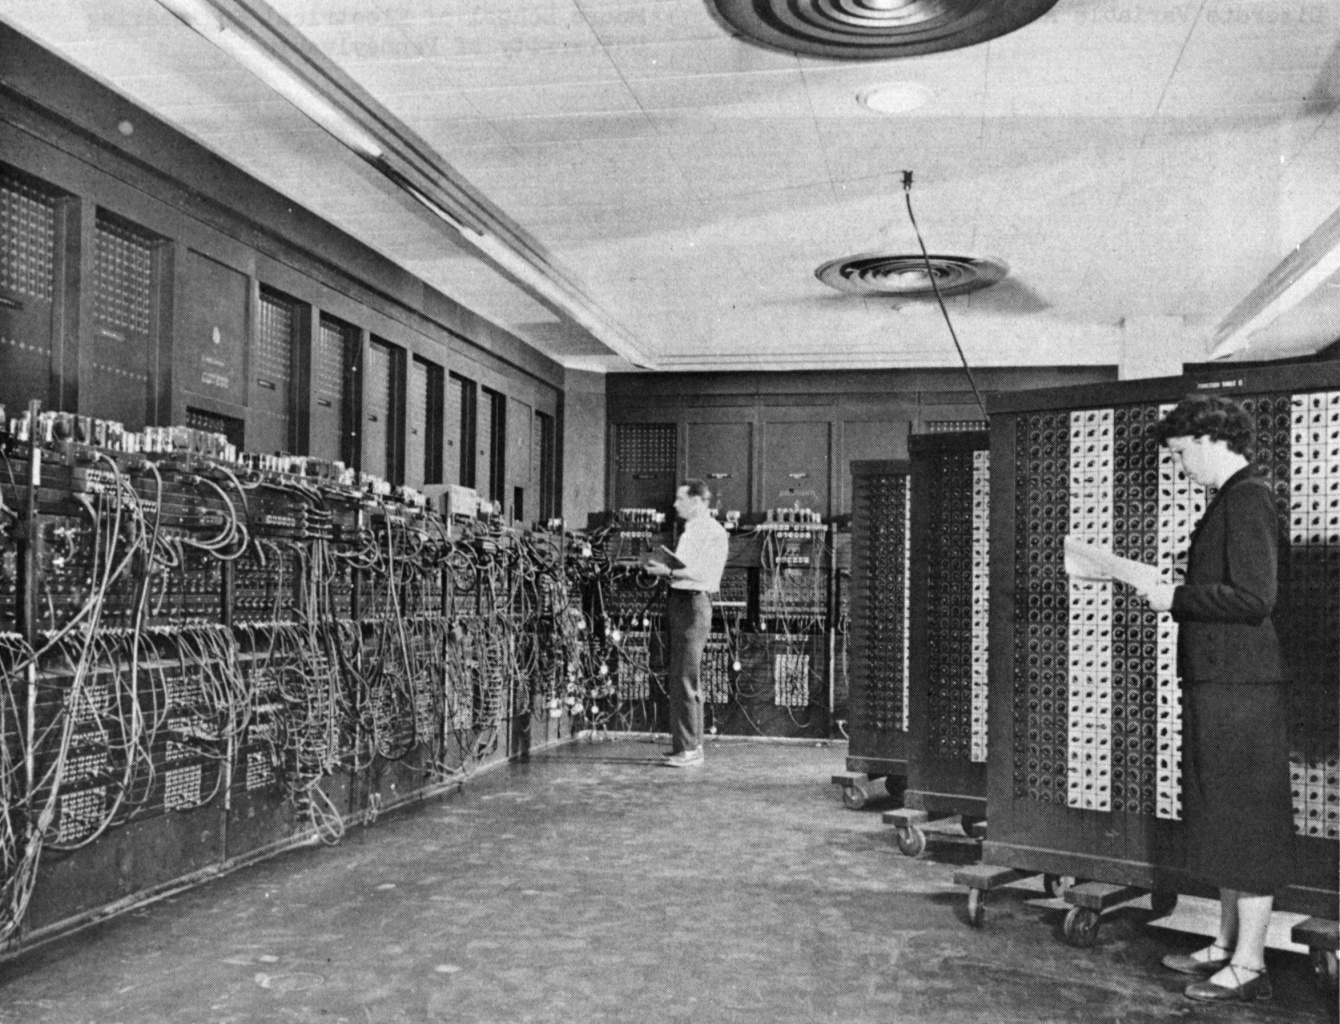 Two engineers working on ENIAC, one of the first programmable digital computers